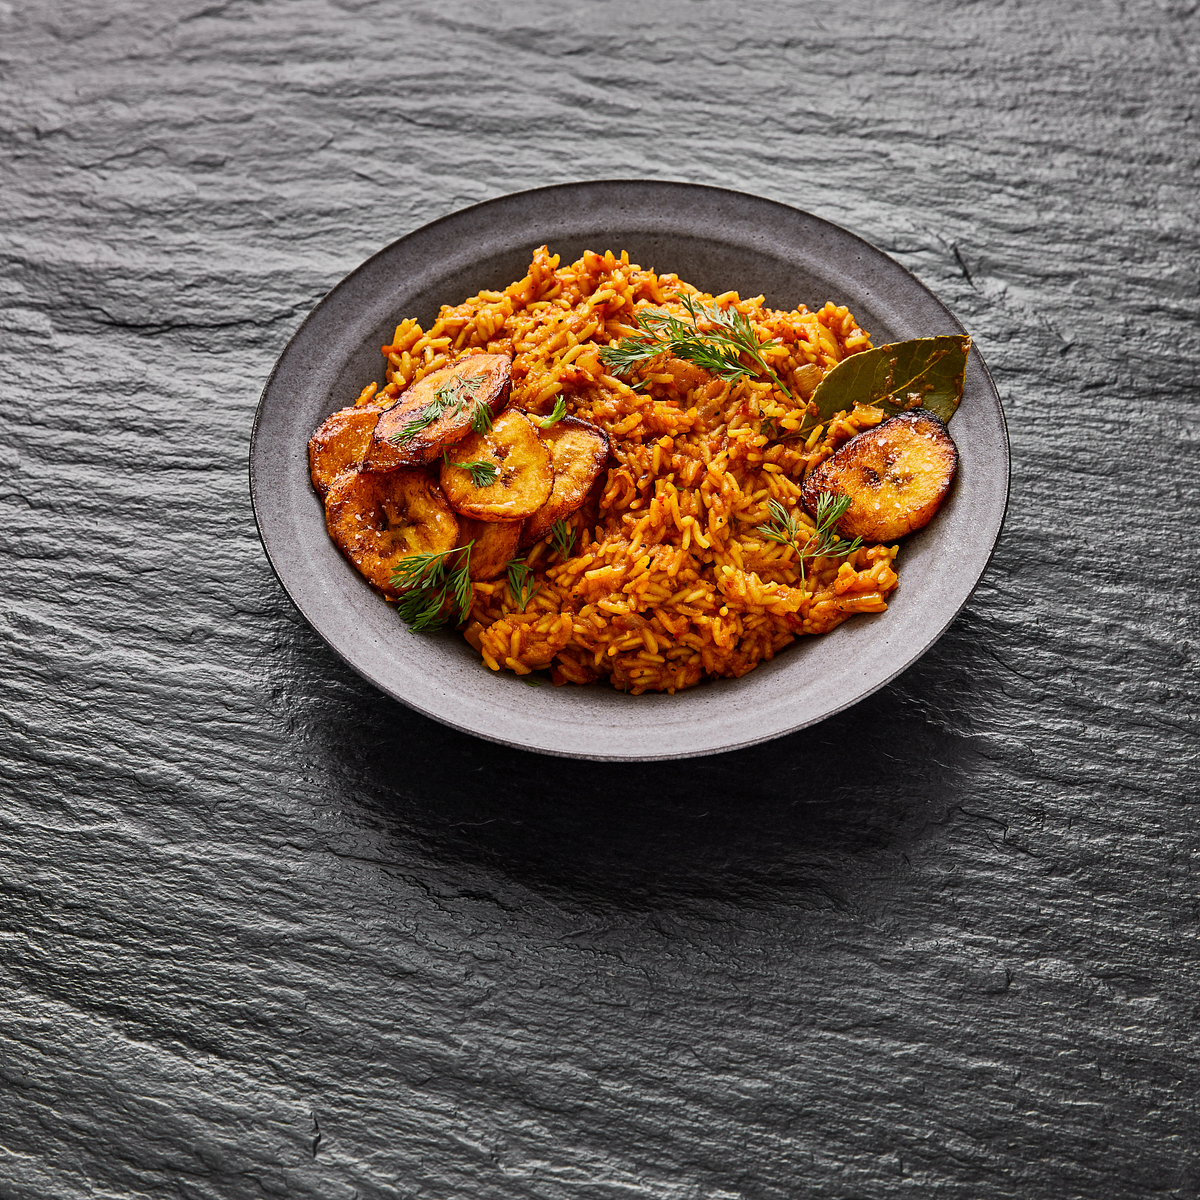 Nigerian Jollof Rice with Chicken and Fried Plantains Recipe